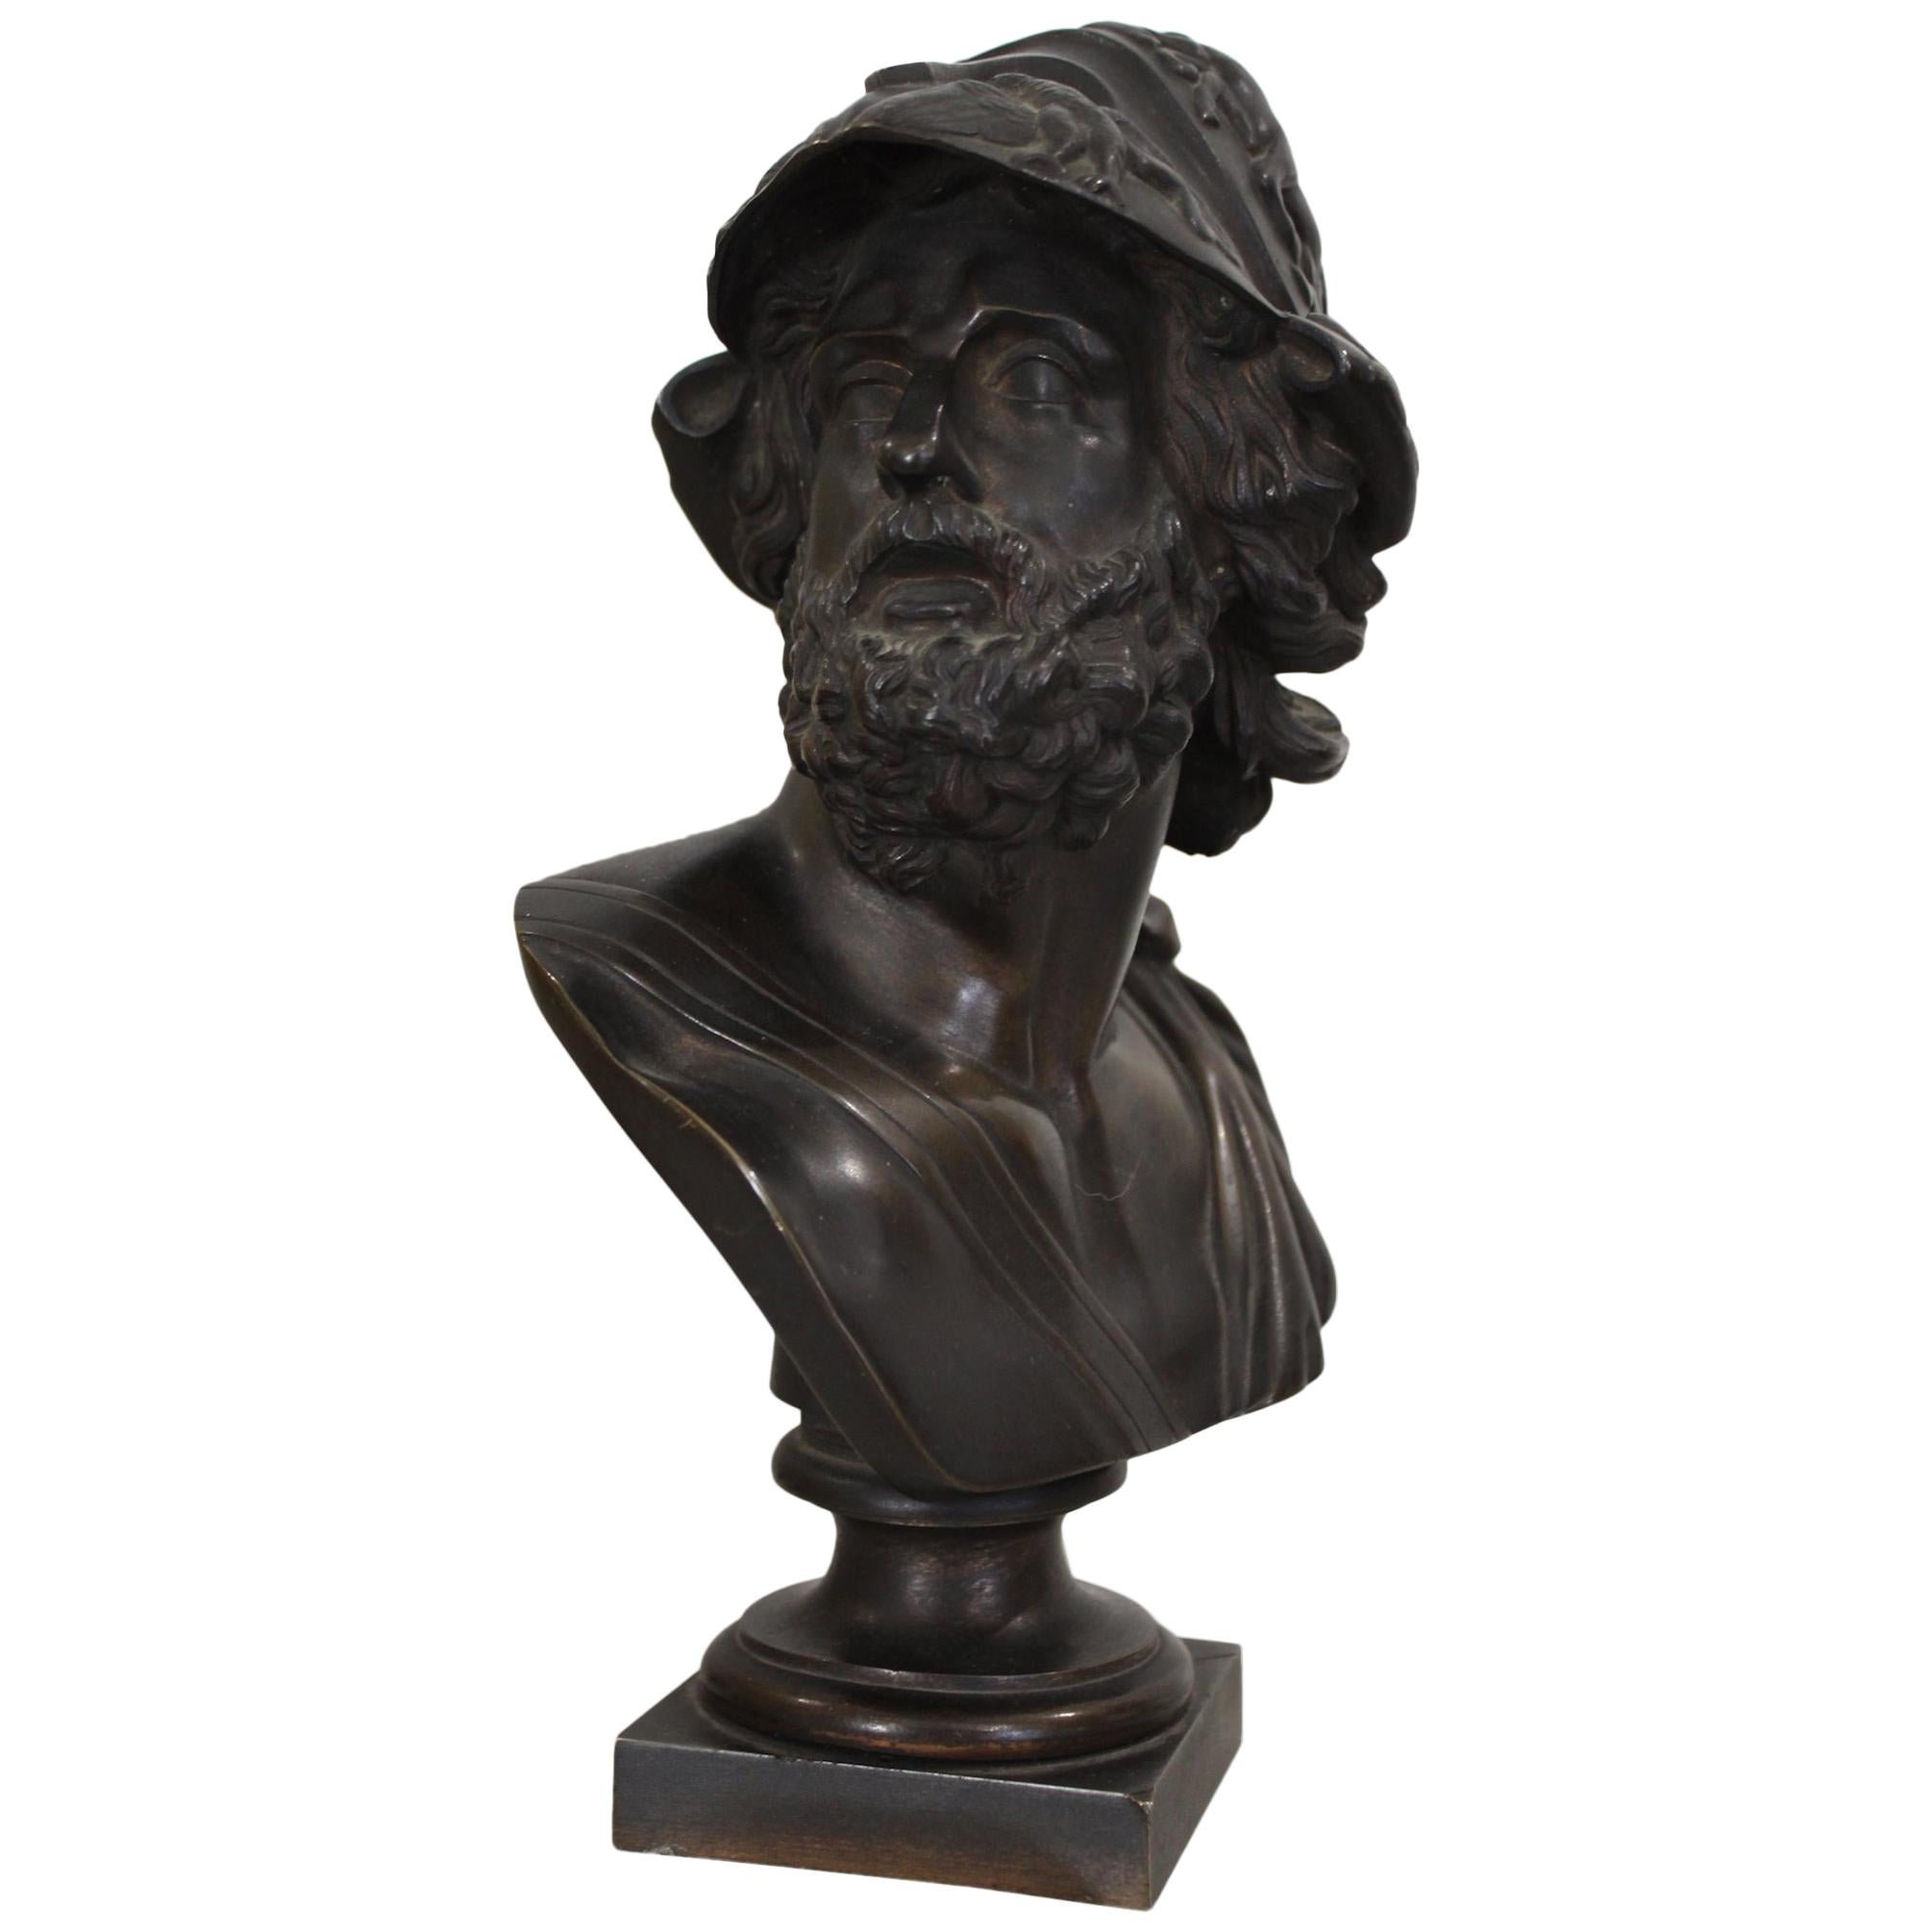 19th Century Bust of Pericles